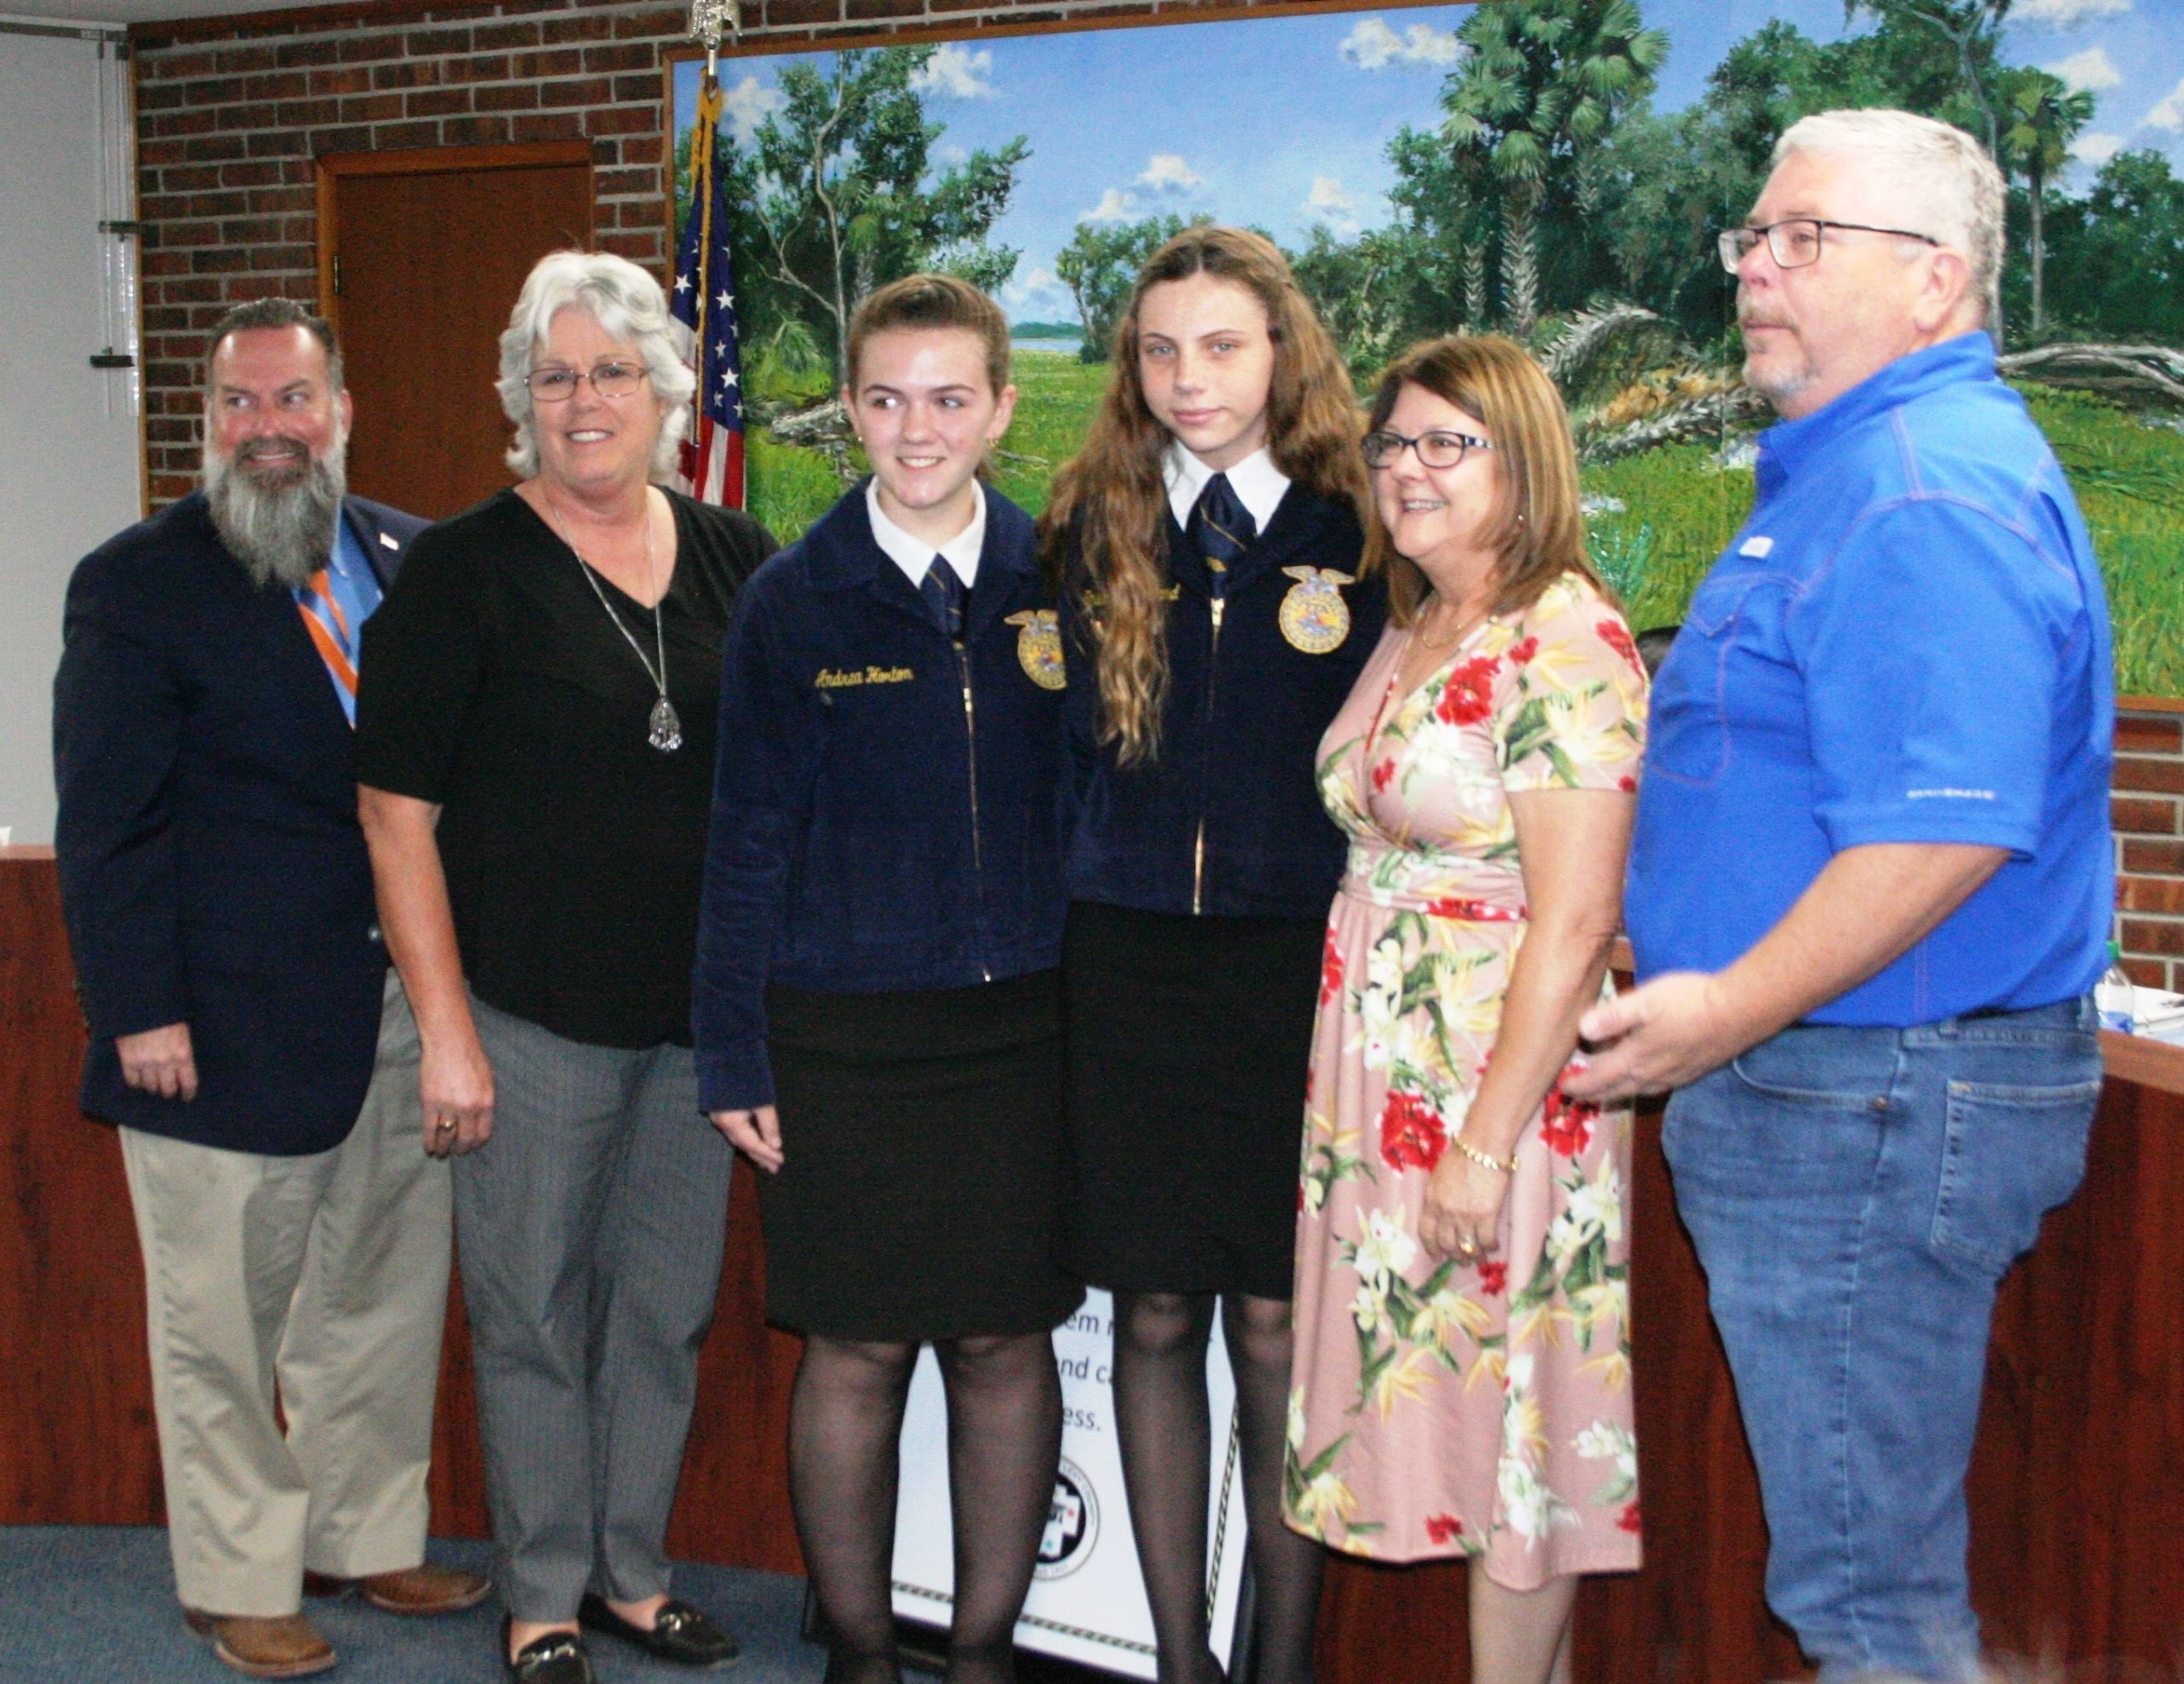 Retiring Bronson Middle High School agriculture instructor Marcia Smith (second from left) is honored by the Levy County School Board meeting Tuesday as the recipient of the Belinda G. Chason Legacy Program Award. Shown from the left, Superintendent Chris Cowart, Smith, BMHS student Andrea Horton, BMHS student Shelby Strickland, District Career and Technical Education Coordinator Carol Jones-Dubois, and School Board Chairman Cameron Asbell.